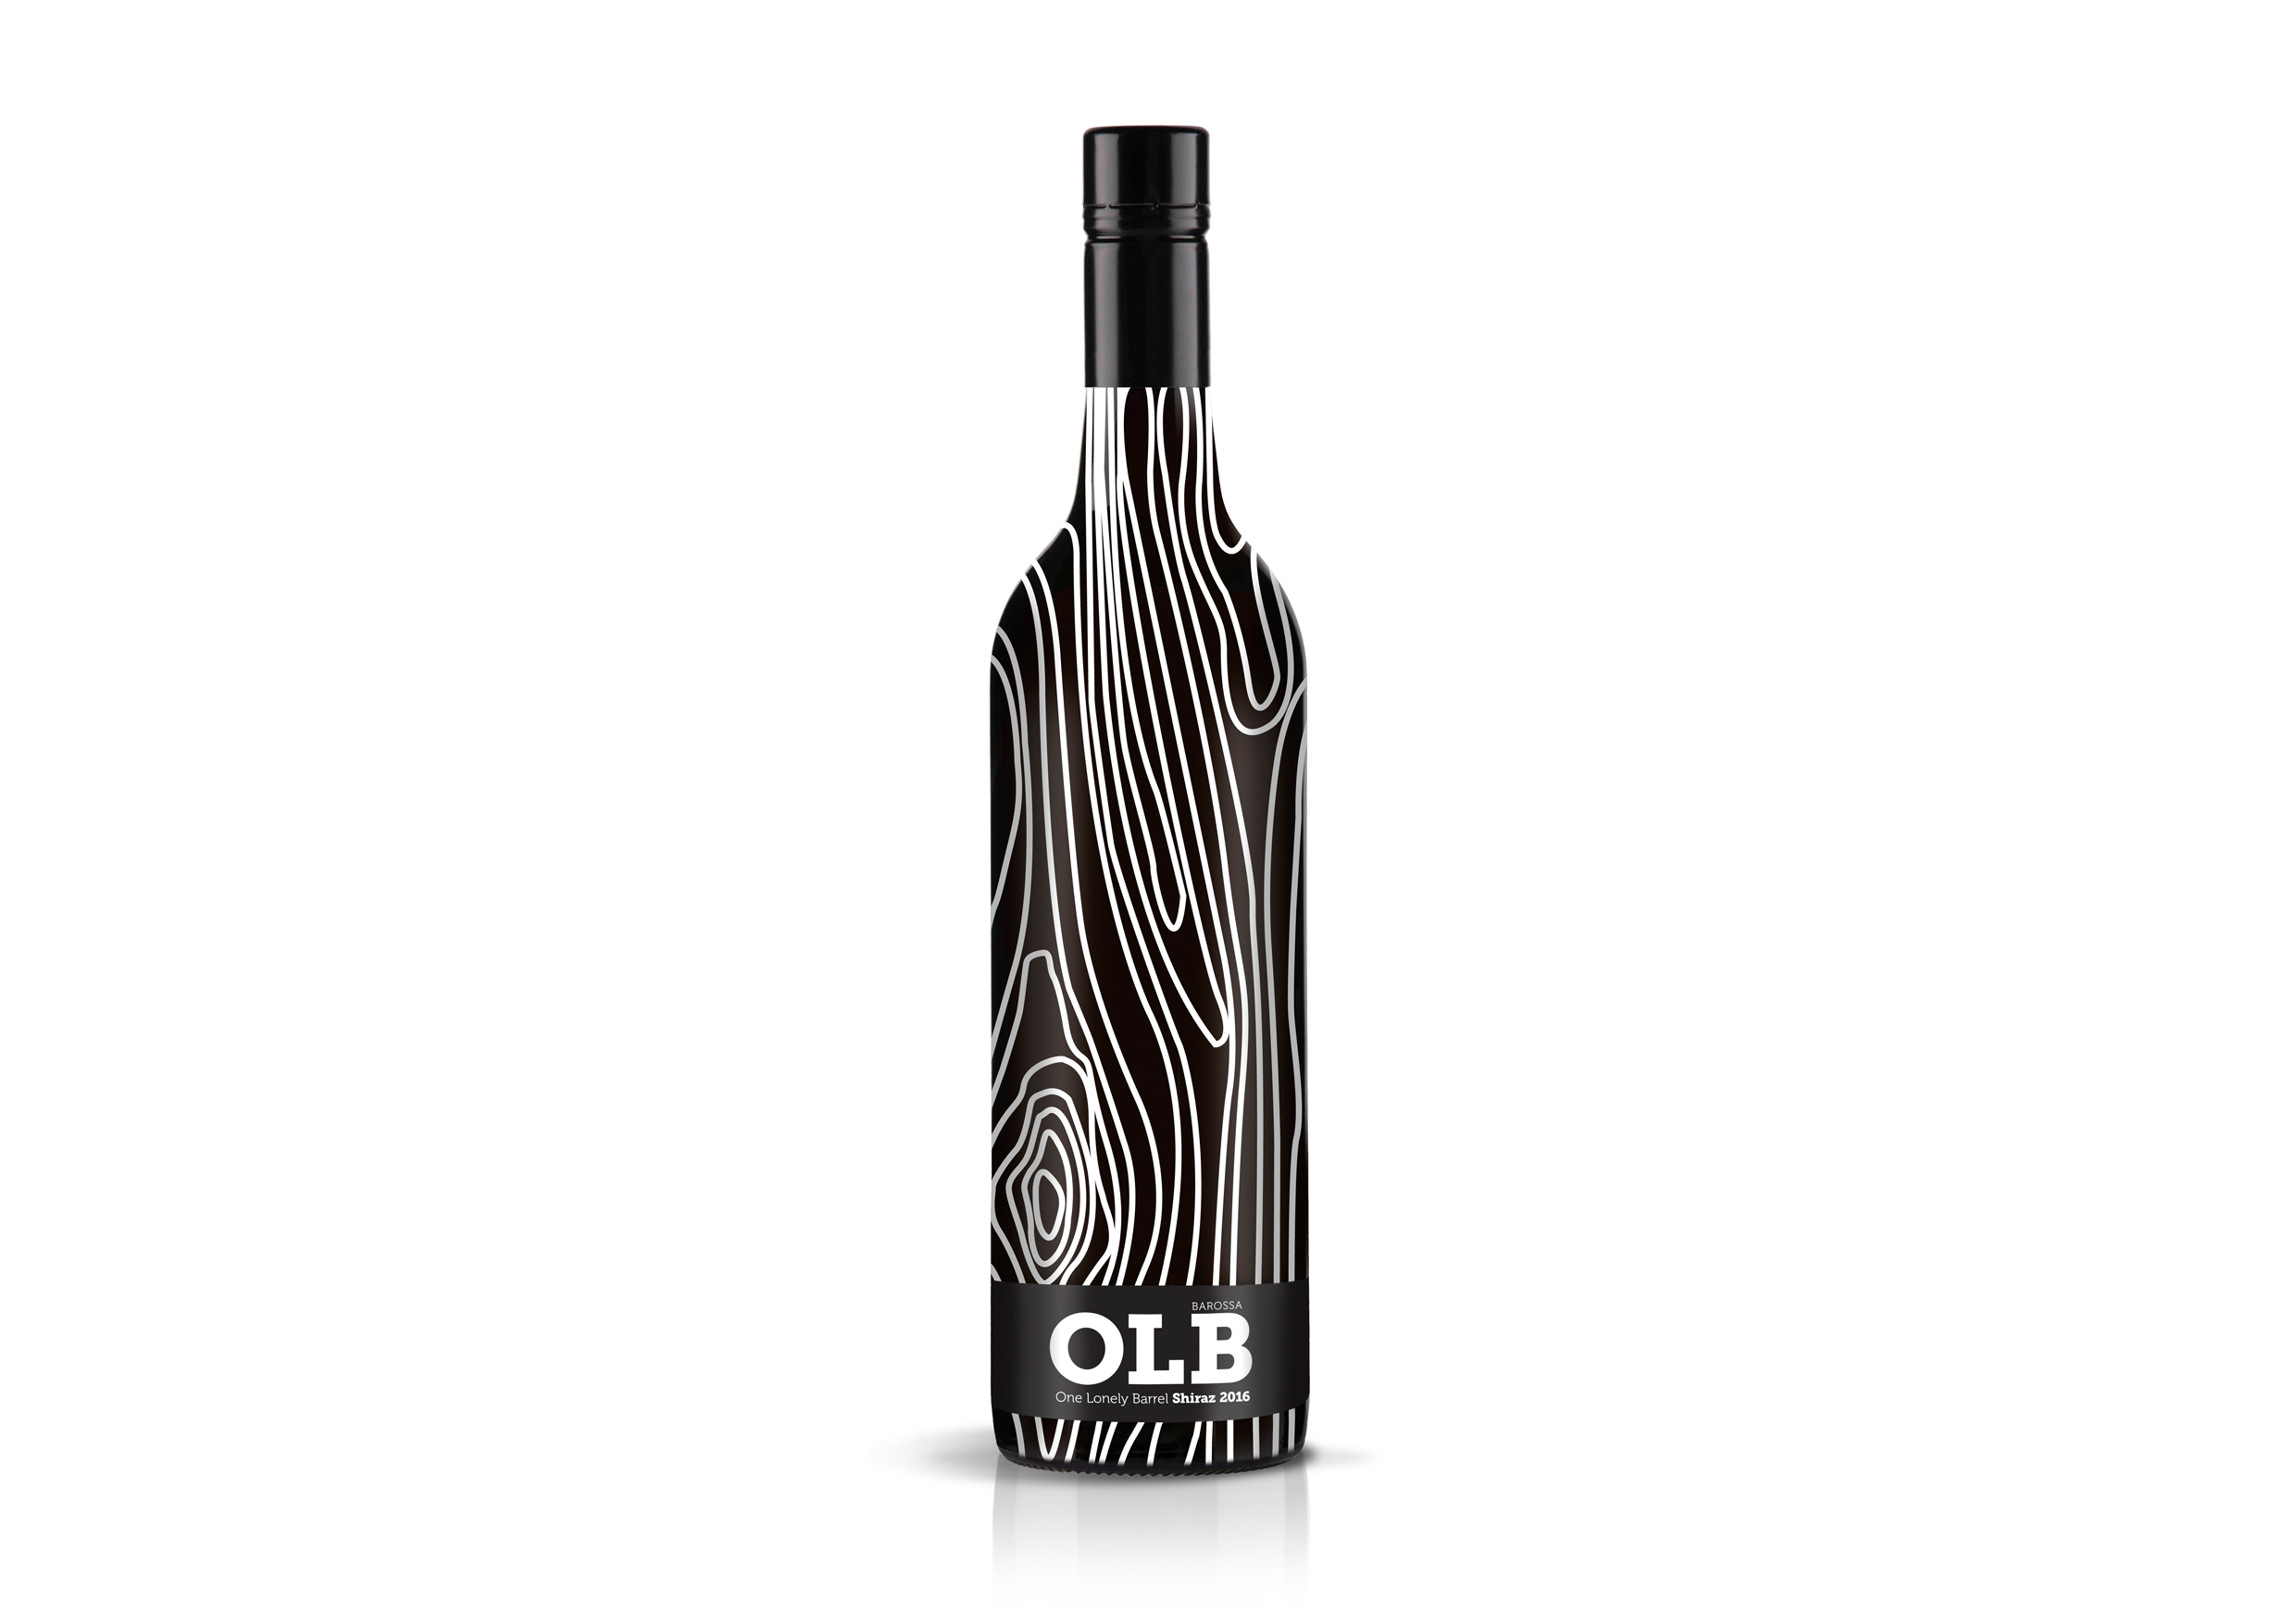 One Lonely Barrel, Graphic design, Wine Labels, Concepts, Adelaide, Wine, packaging